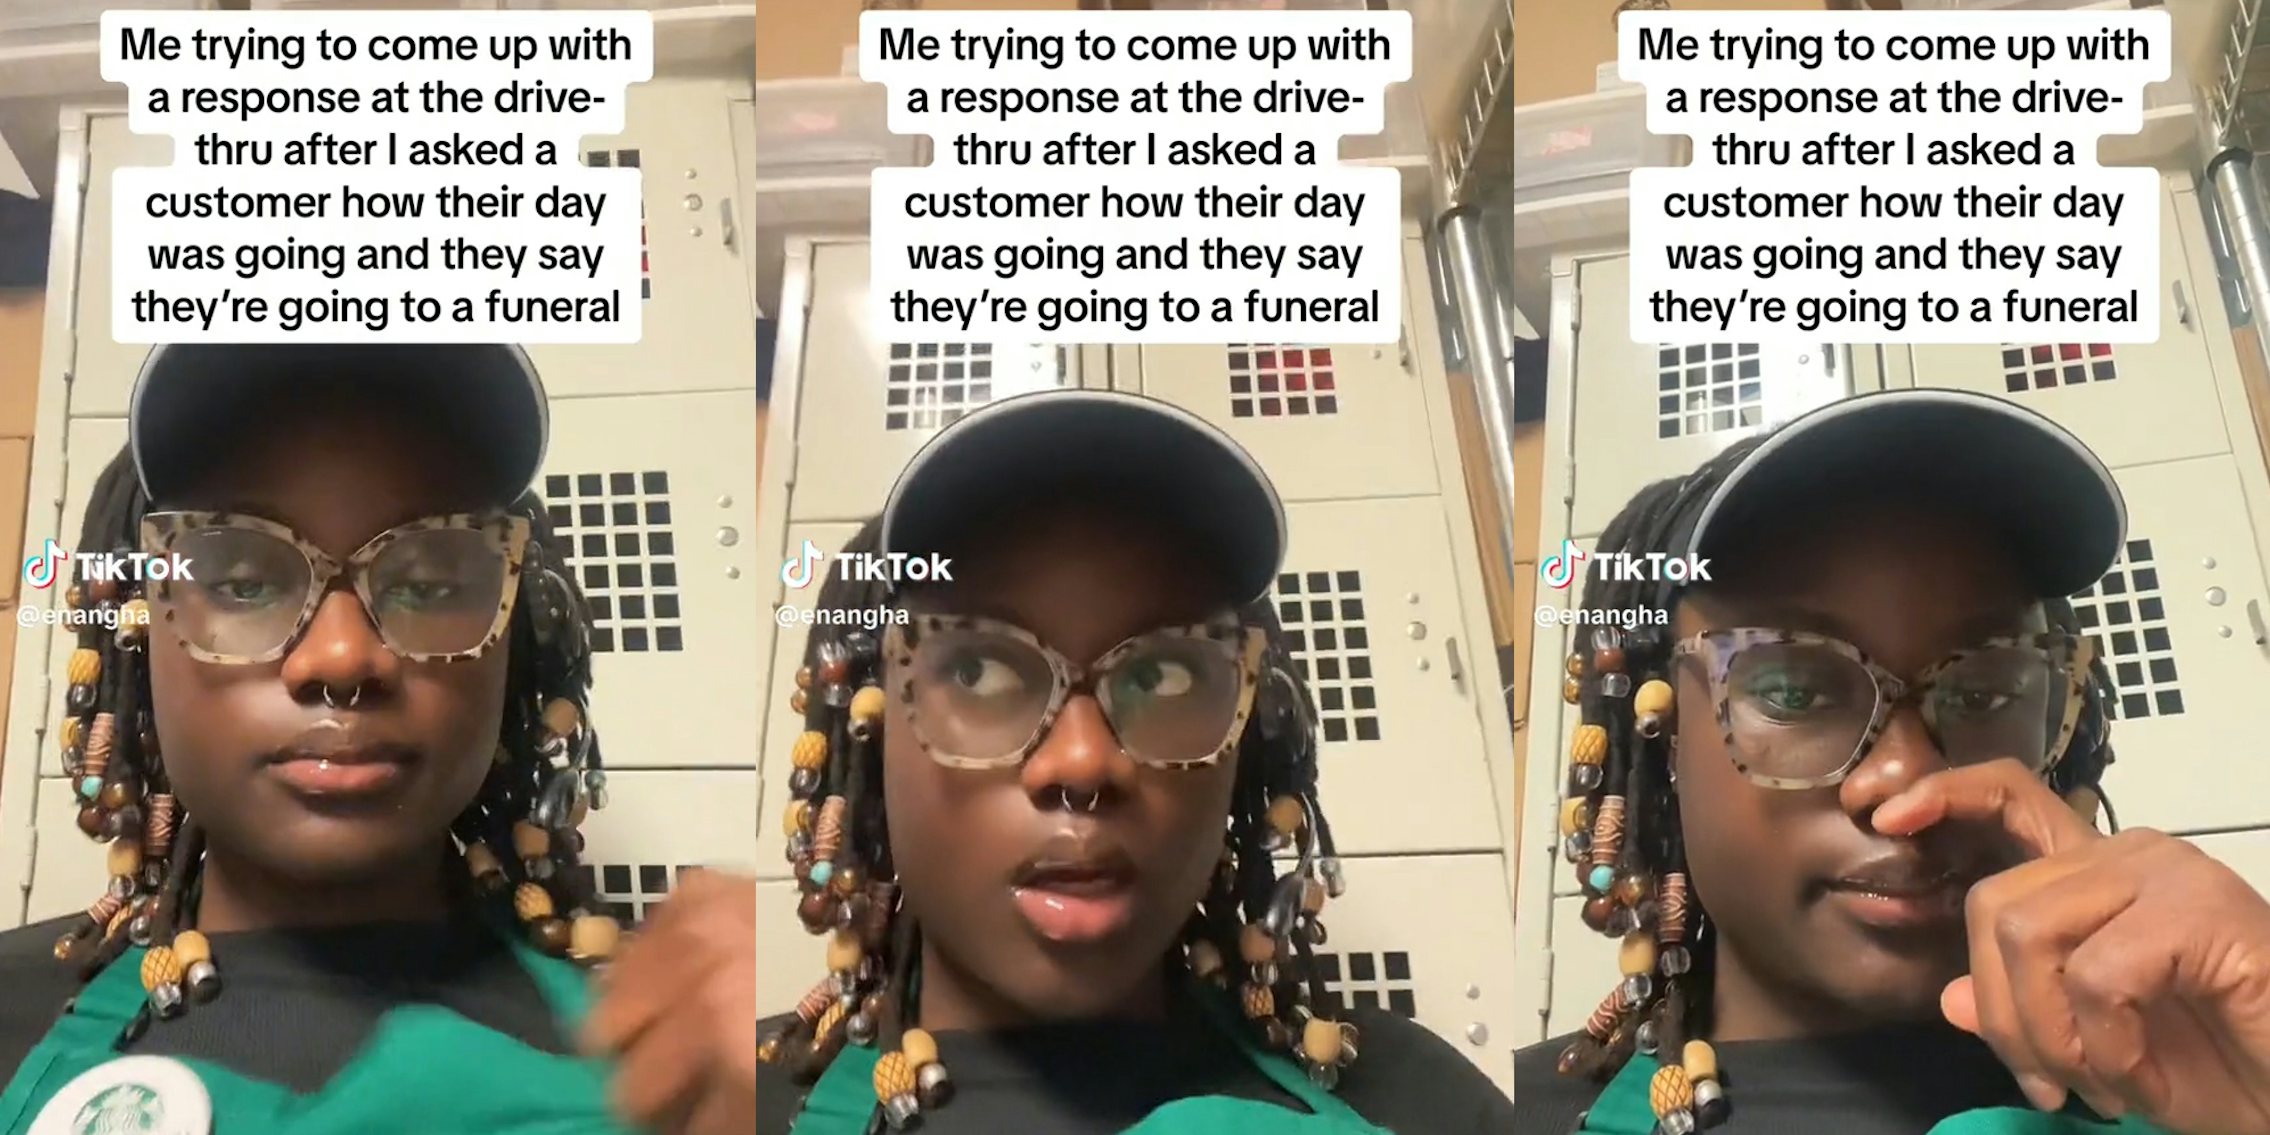 starbucks worker with caption 'me trying to come u p with a response at the drive-thru after i asked a customer how their day was going and they say they're going to a funeral'